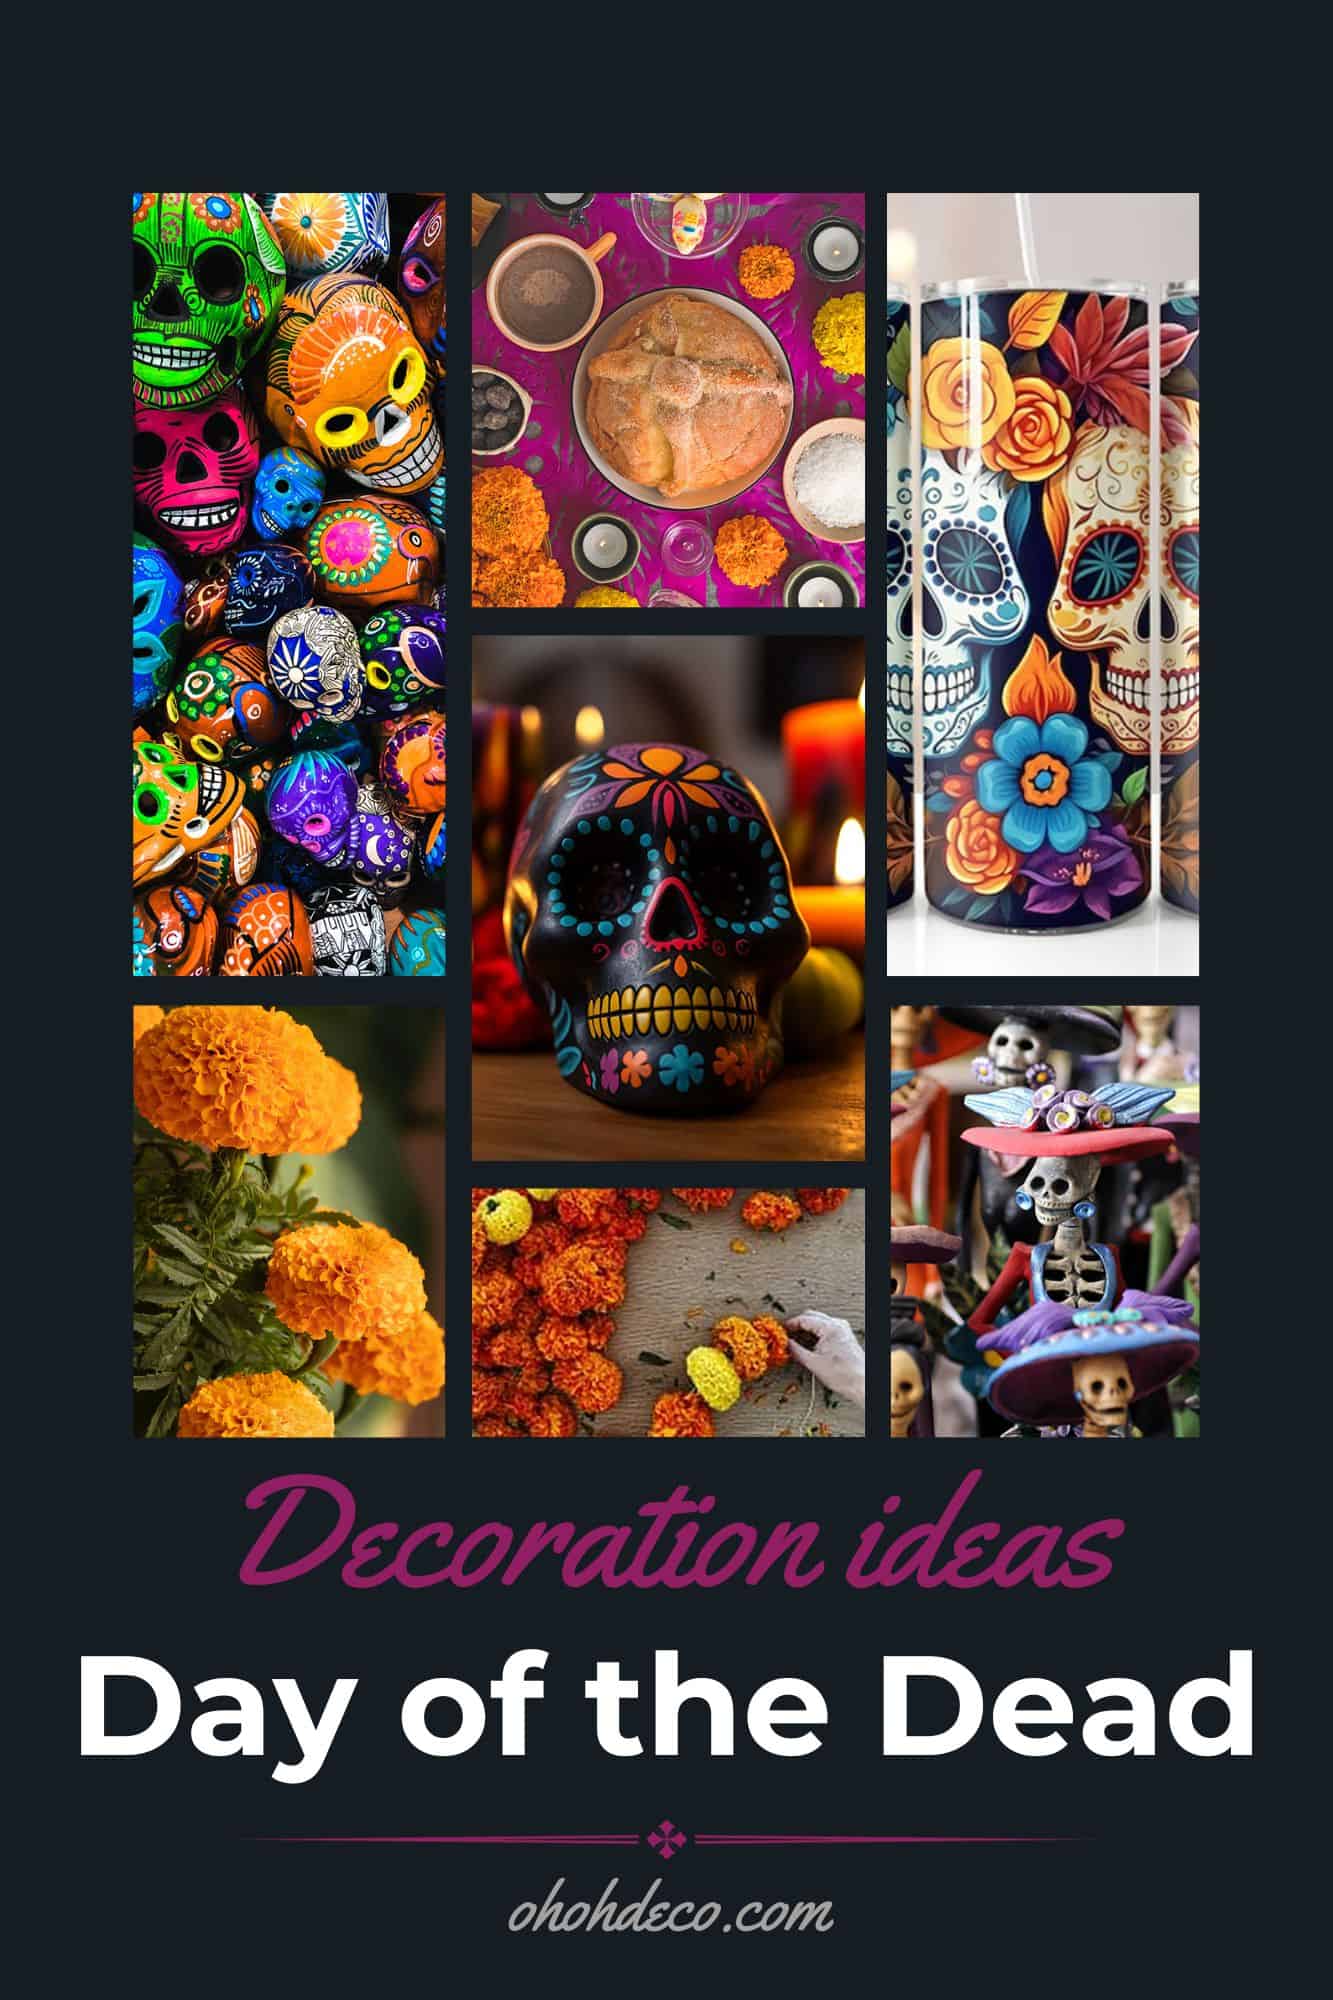 Day of the dead decorations ideas